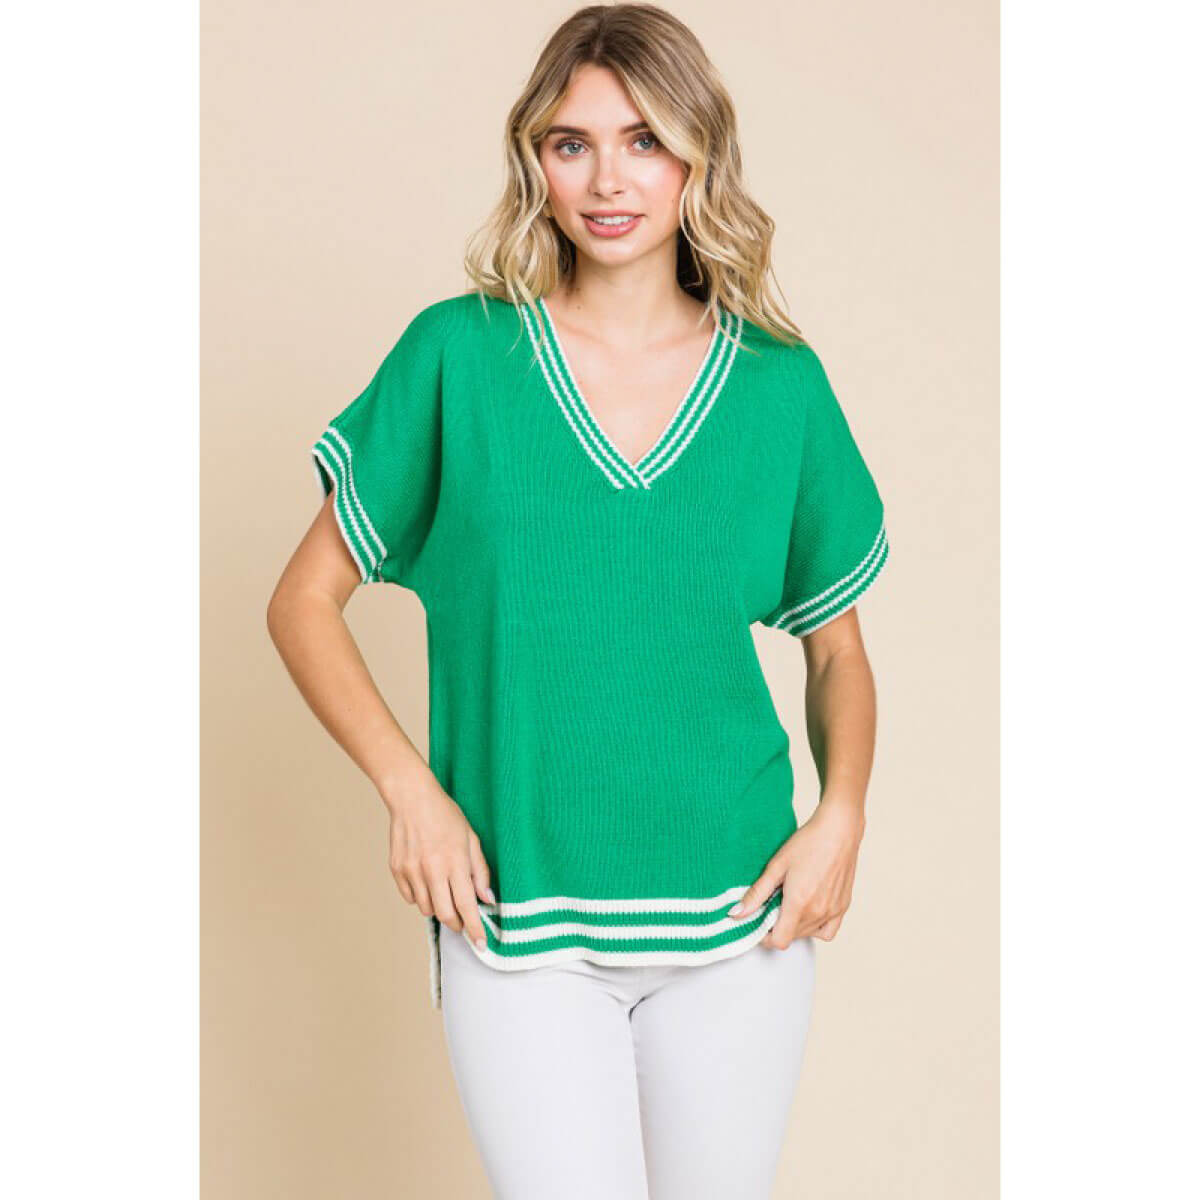 Solid Knit Top with Striped Hemline green front | MILK MONEY milkmoney.co | cute tops for women. trendy tops for women. cute blouses for women. stylish tops for women. pretty womens tops. 